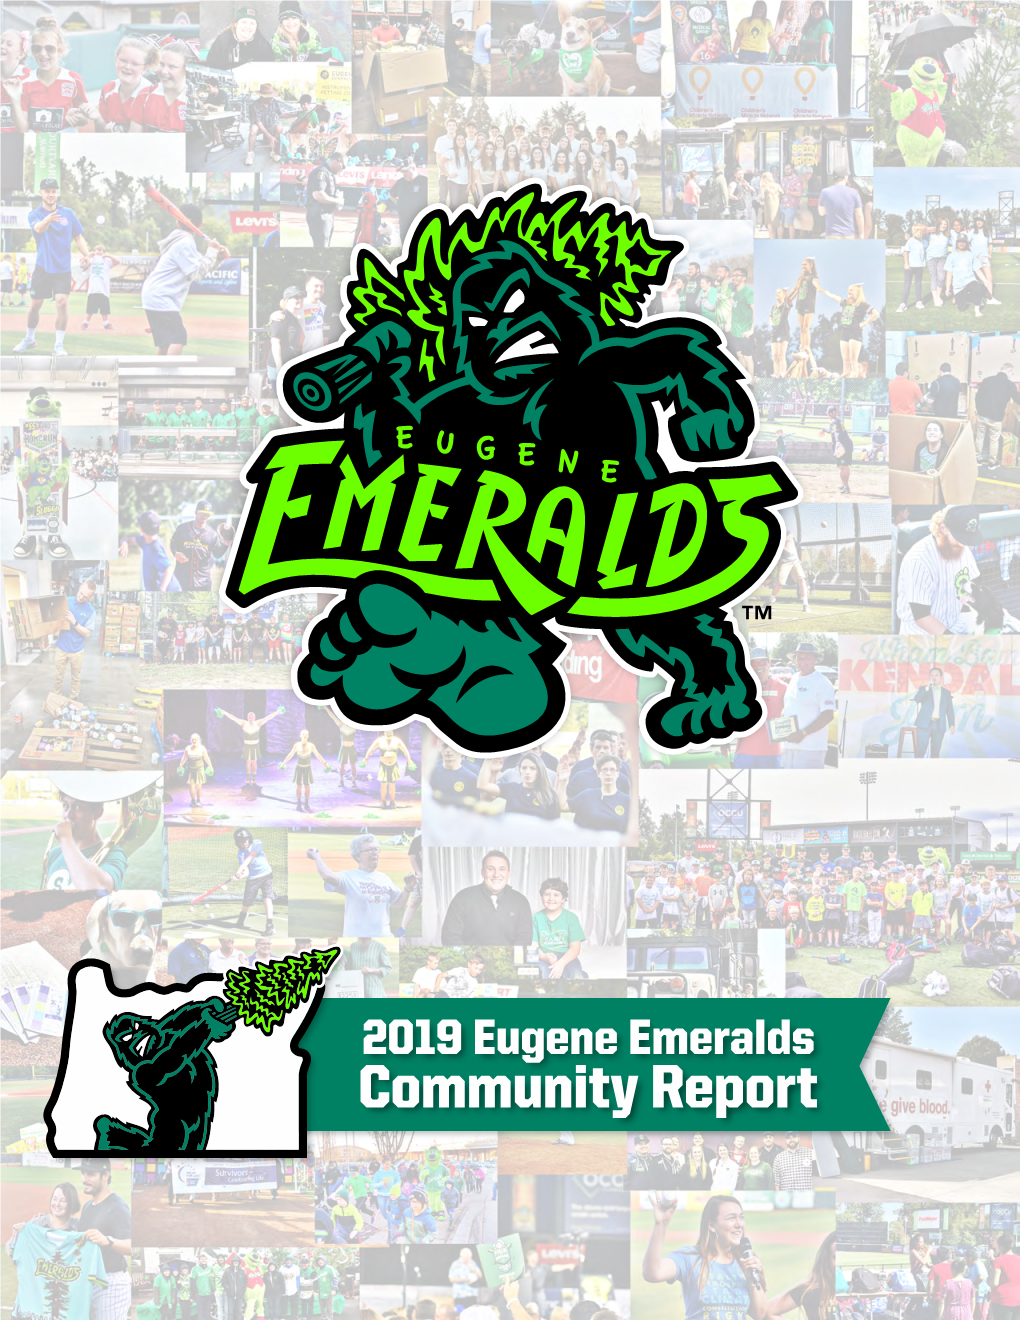 2019 Eugene Emeralds Community Report American Cancer Society When Cancer Strikes, It Hits from All Sides